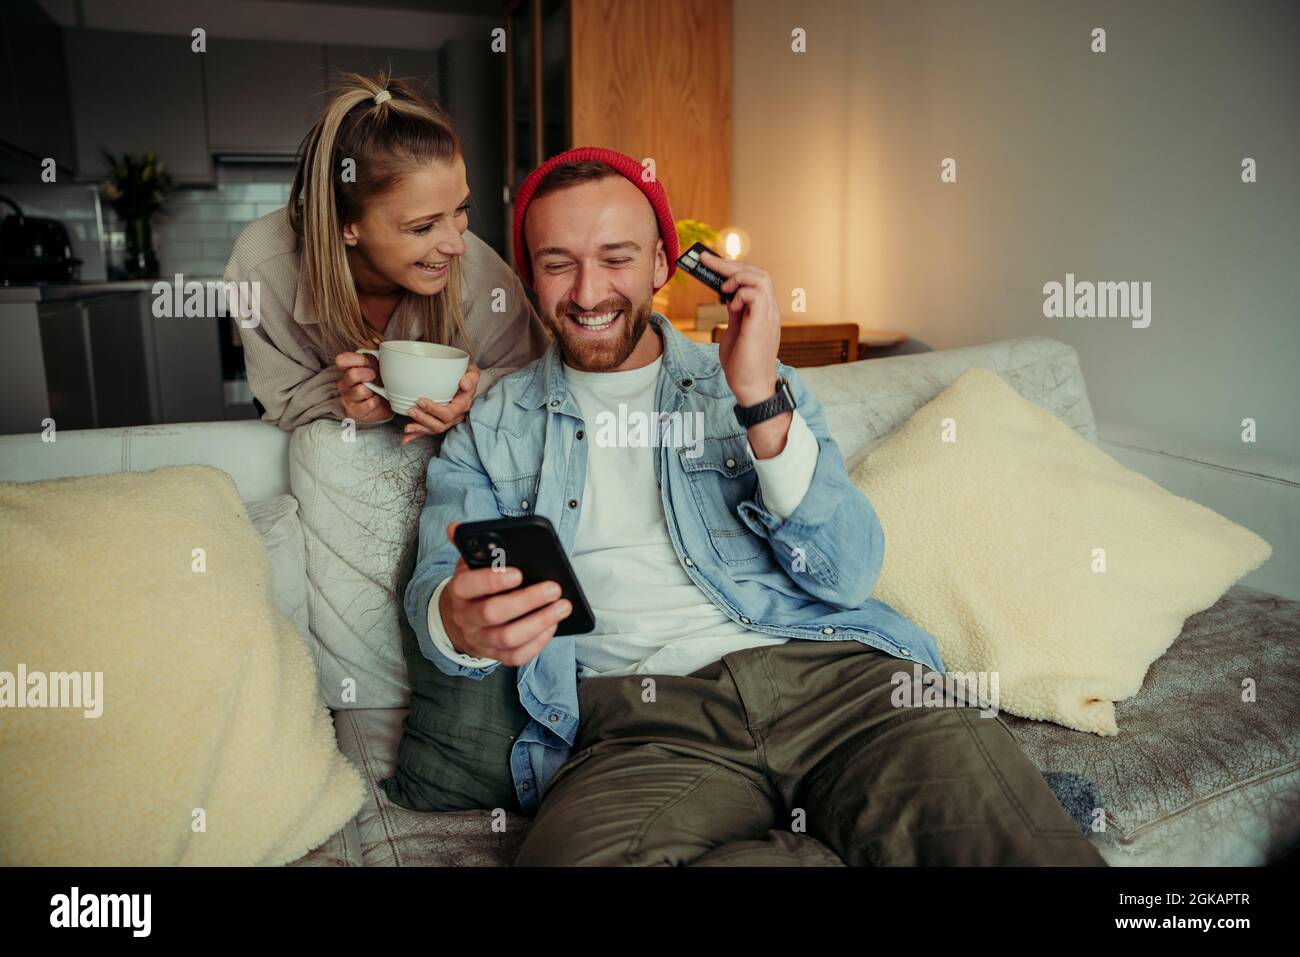 Caucasian couple sitting on couch drinking coffee making online payment using cellular device Stock Photo